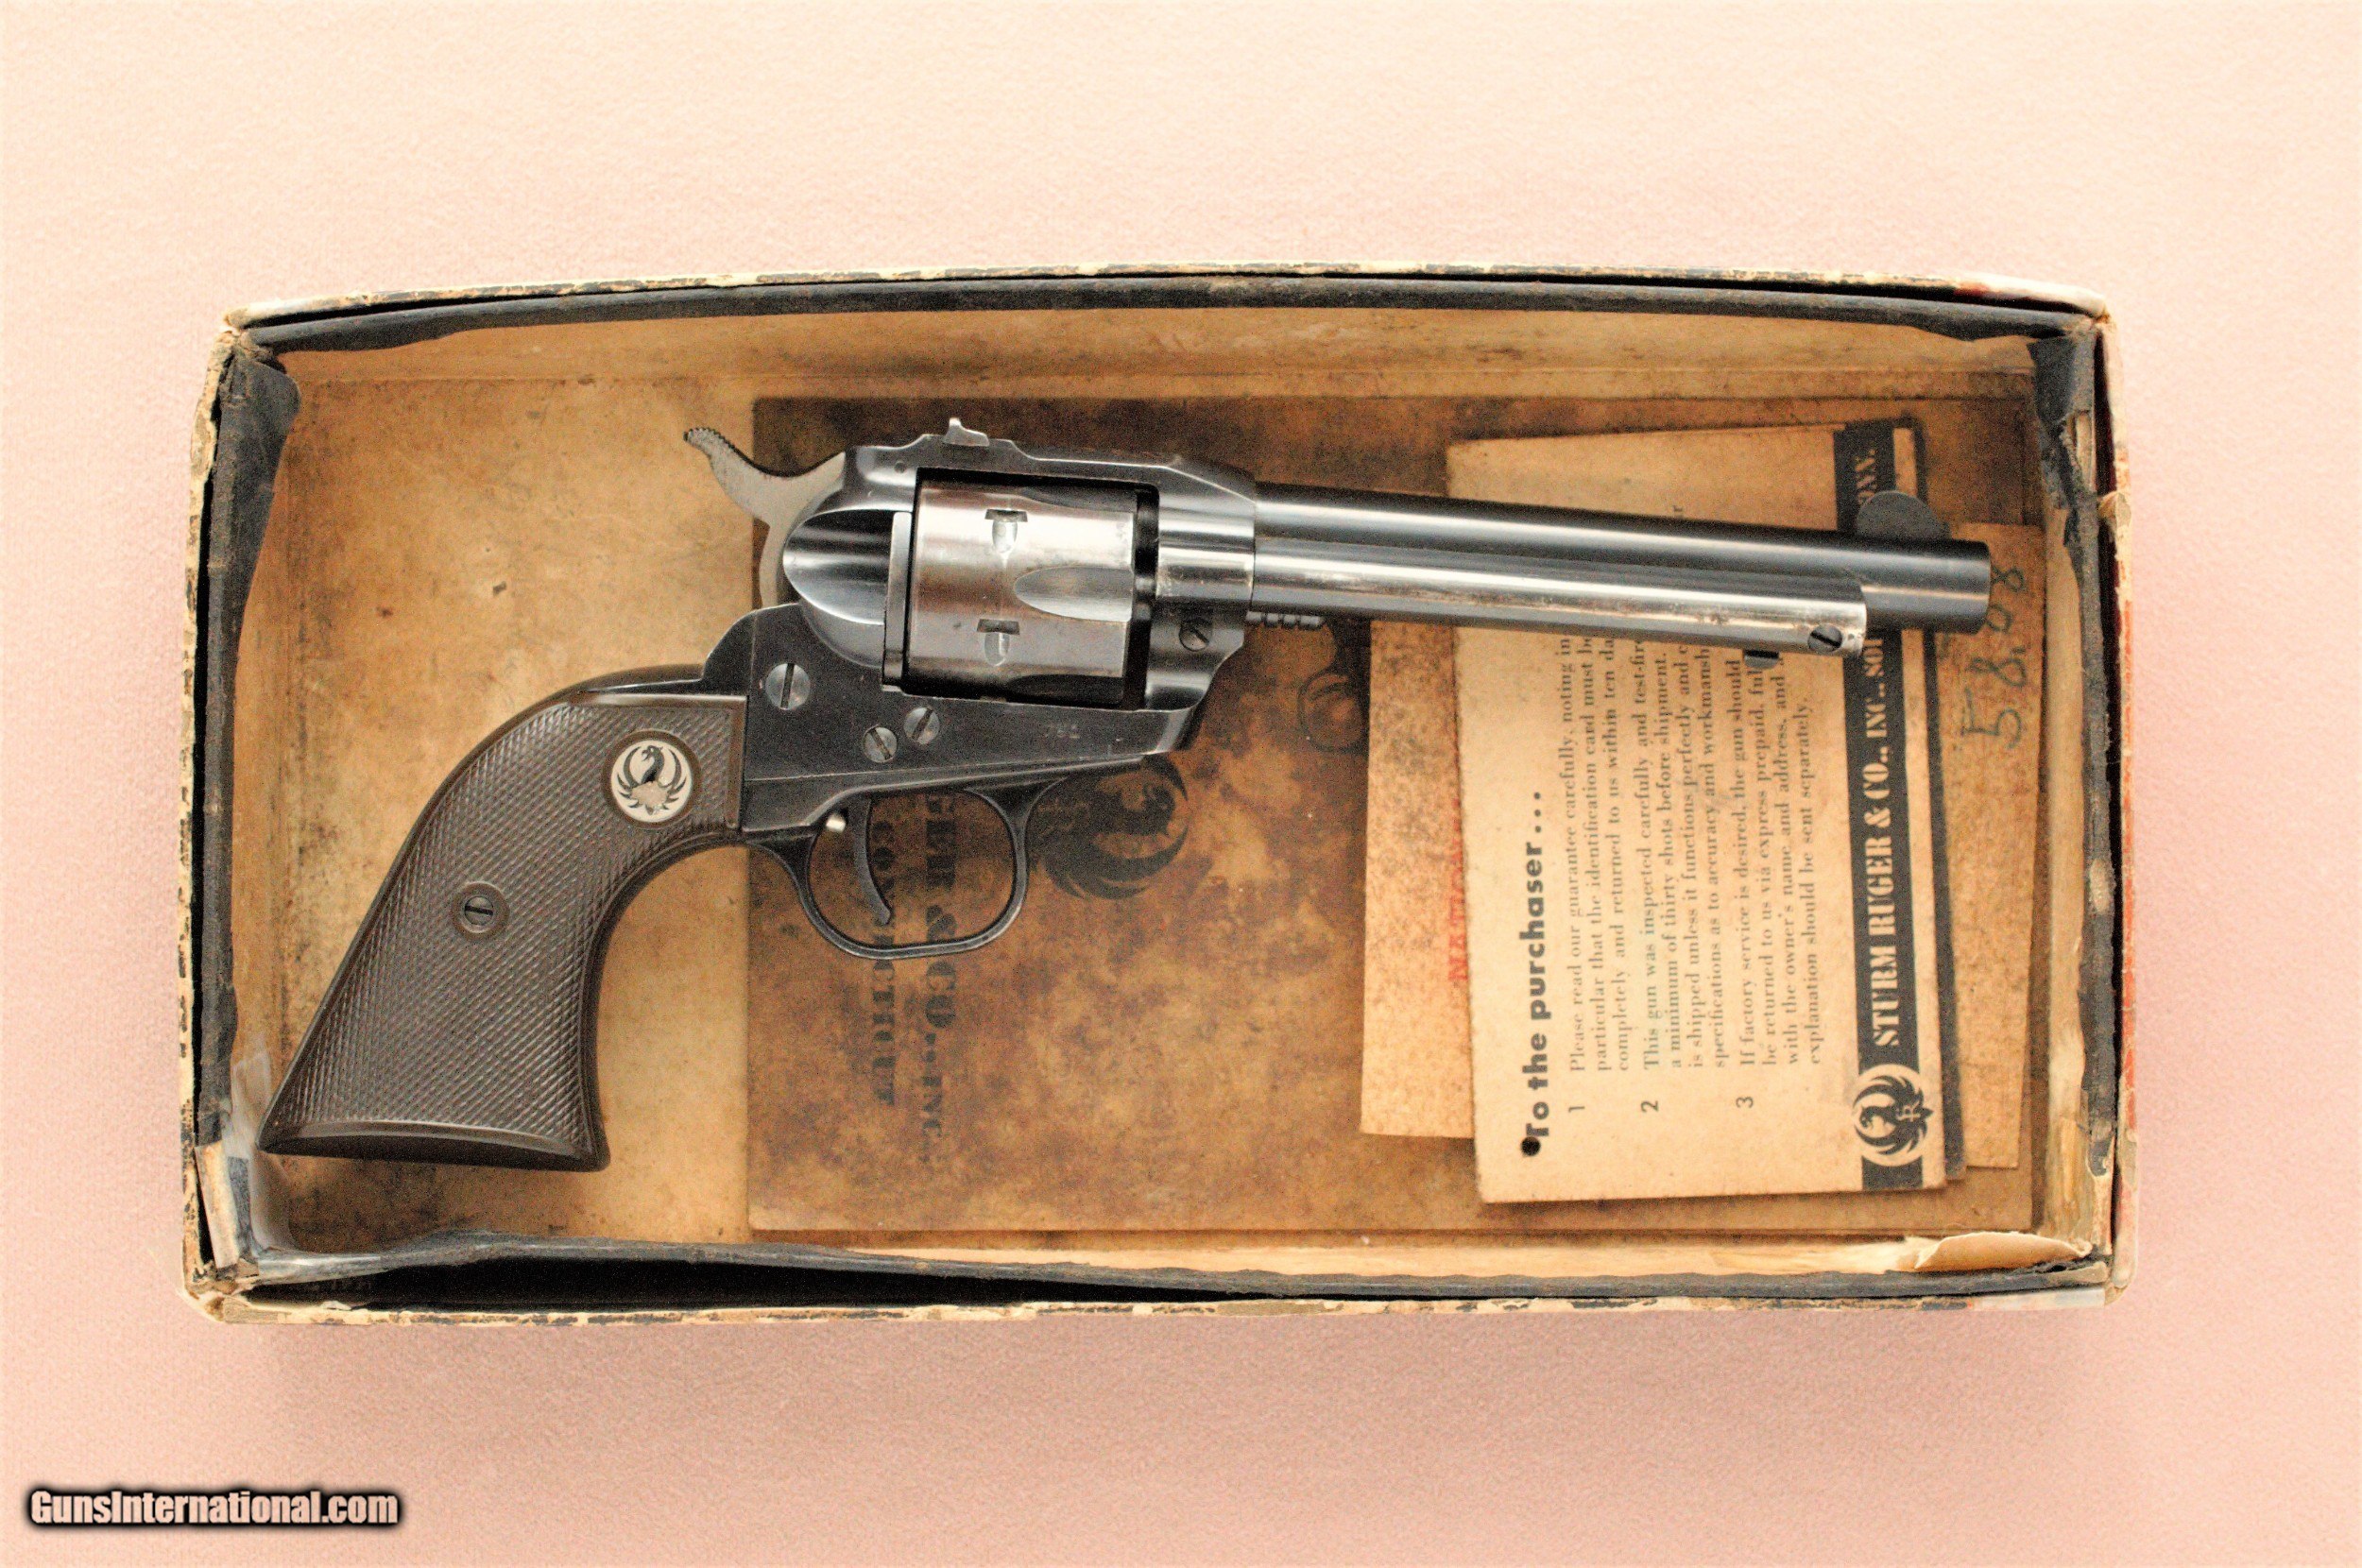 ruger single six serial number 553332 what year made